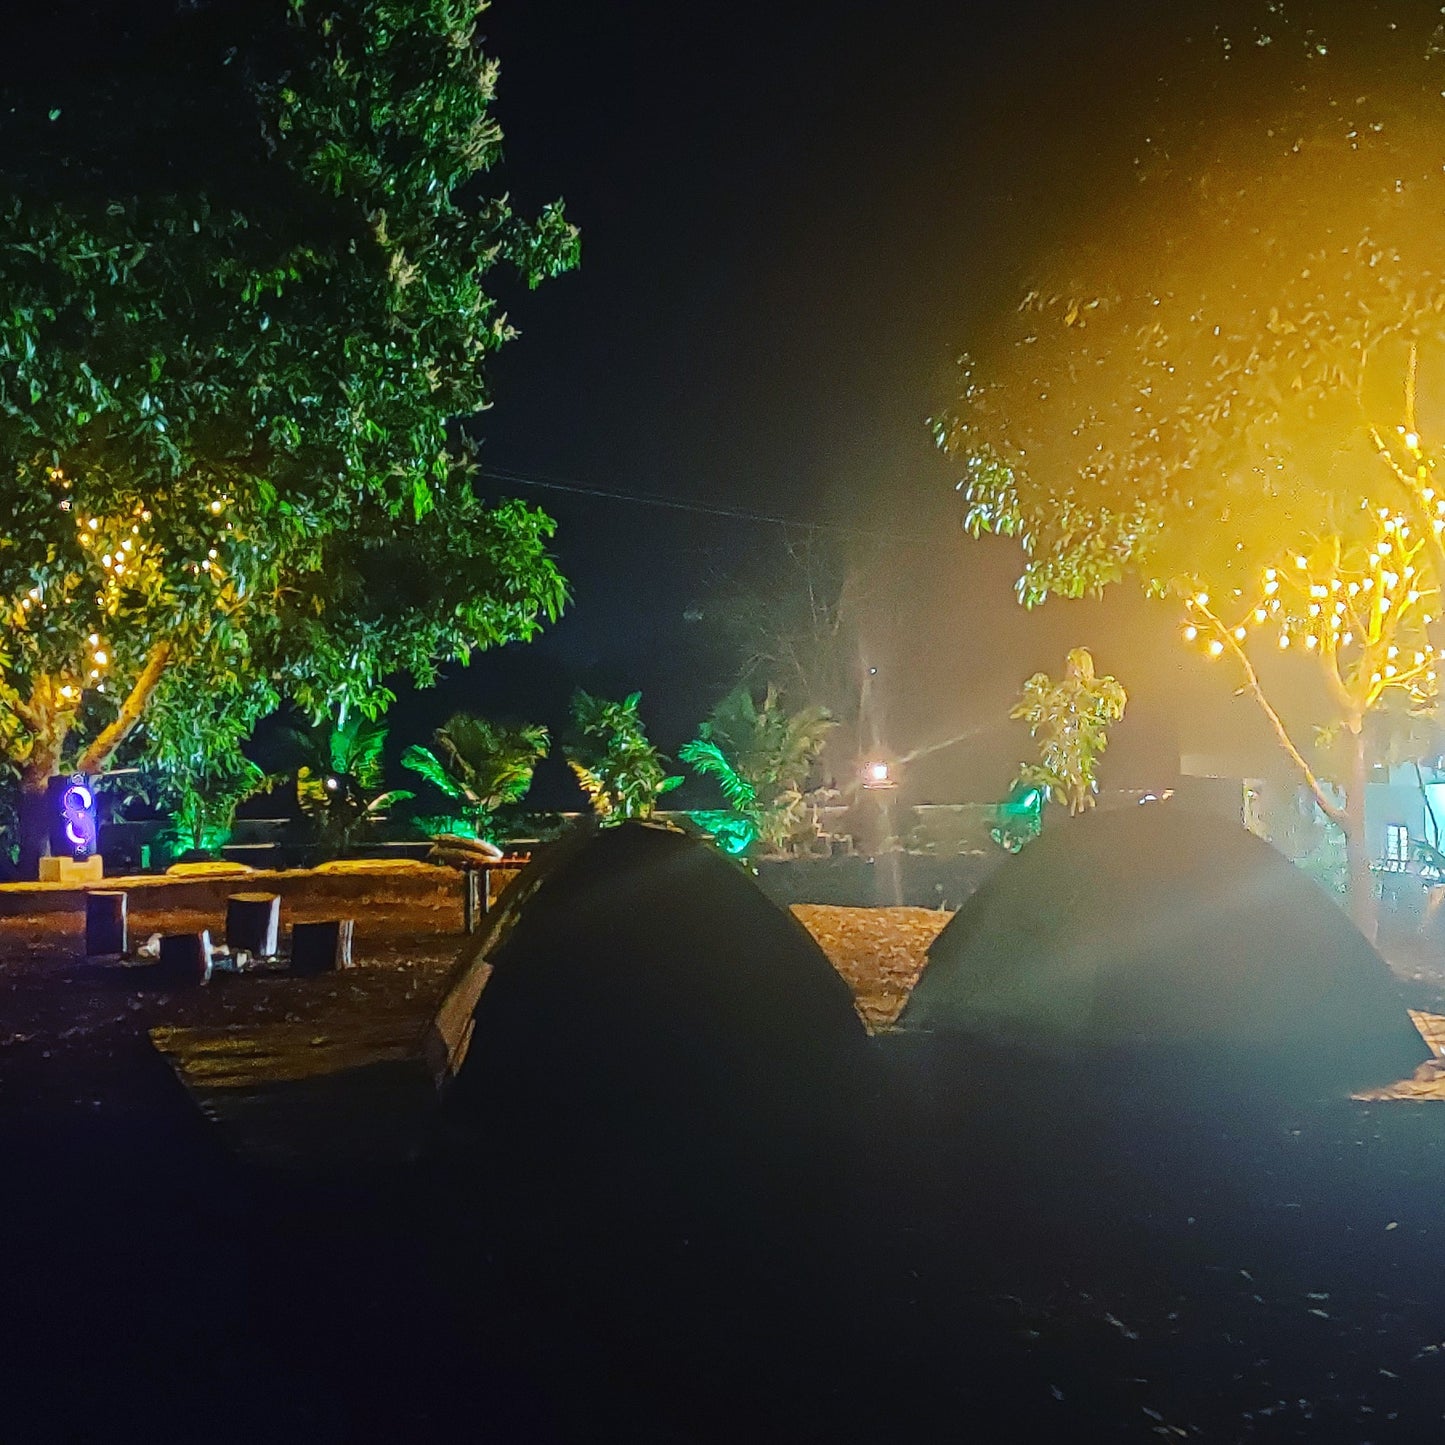 Rohida Farm Camping (Ambawade) : Stay in Tent  Night Camp Fire with Music, All Meals (Veg/Non-Veg) & MORE!